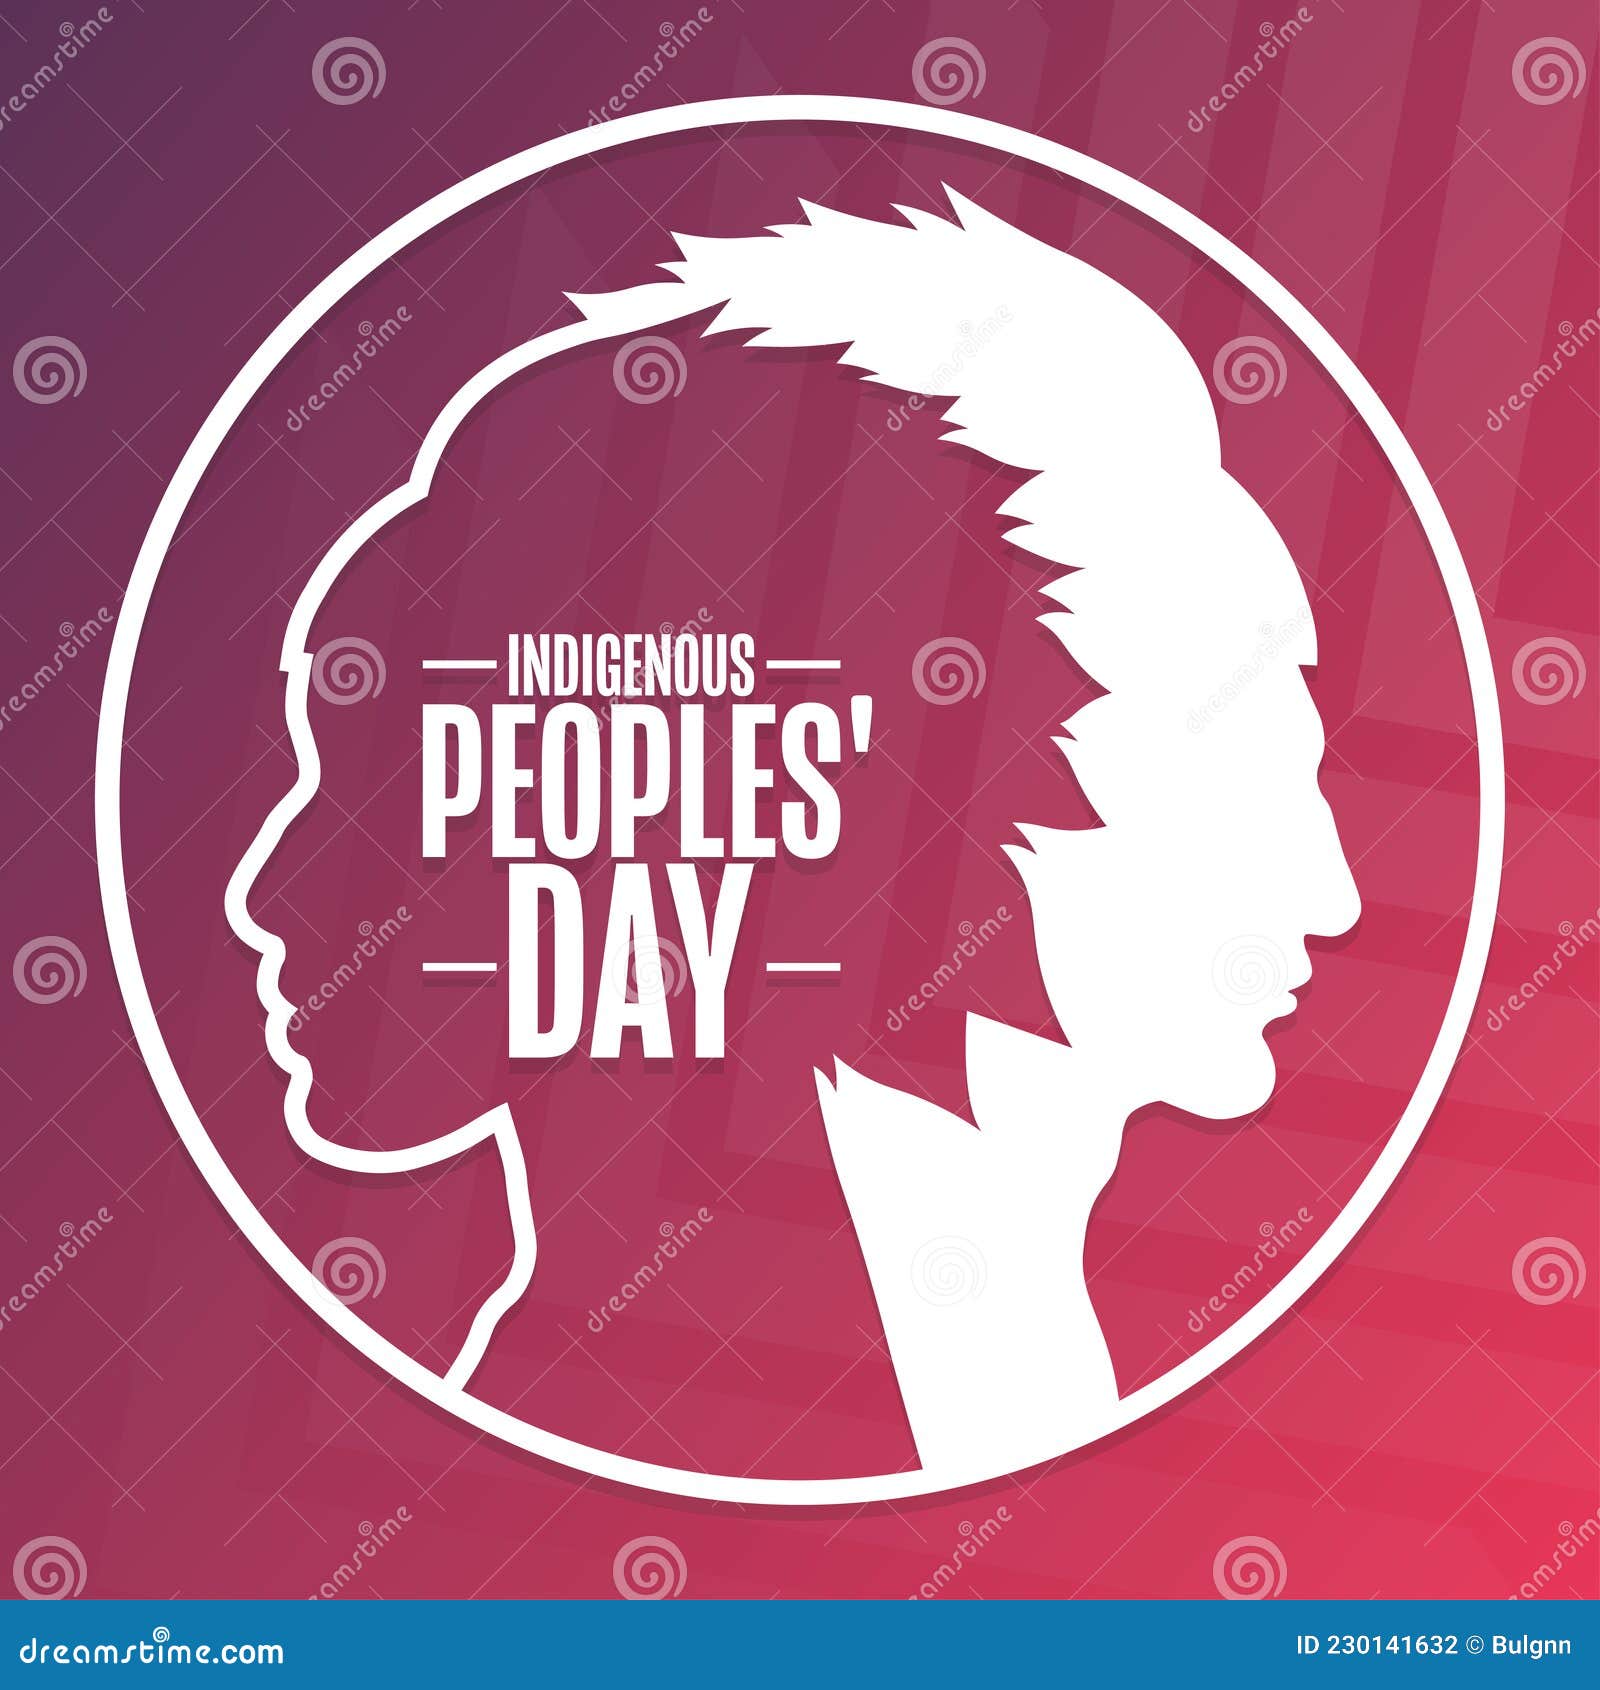 indigenous peoples day. holiday concept. template for background, banner, card, poster with text inscription. 